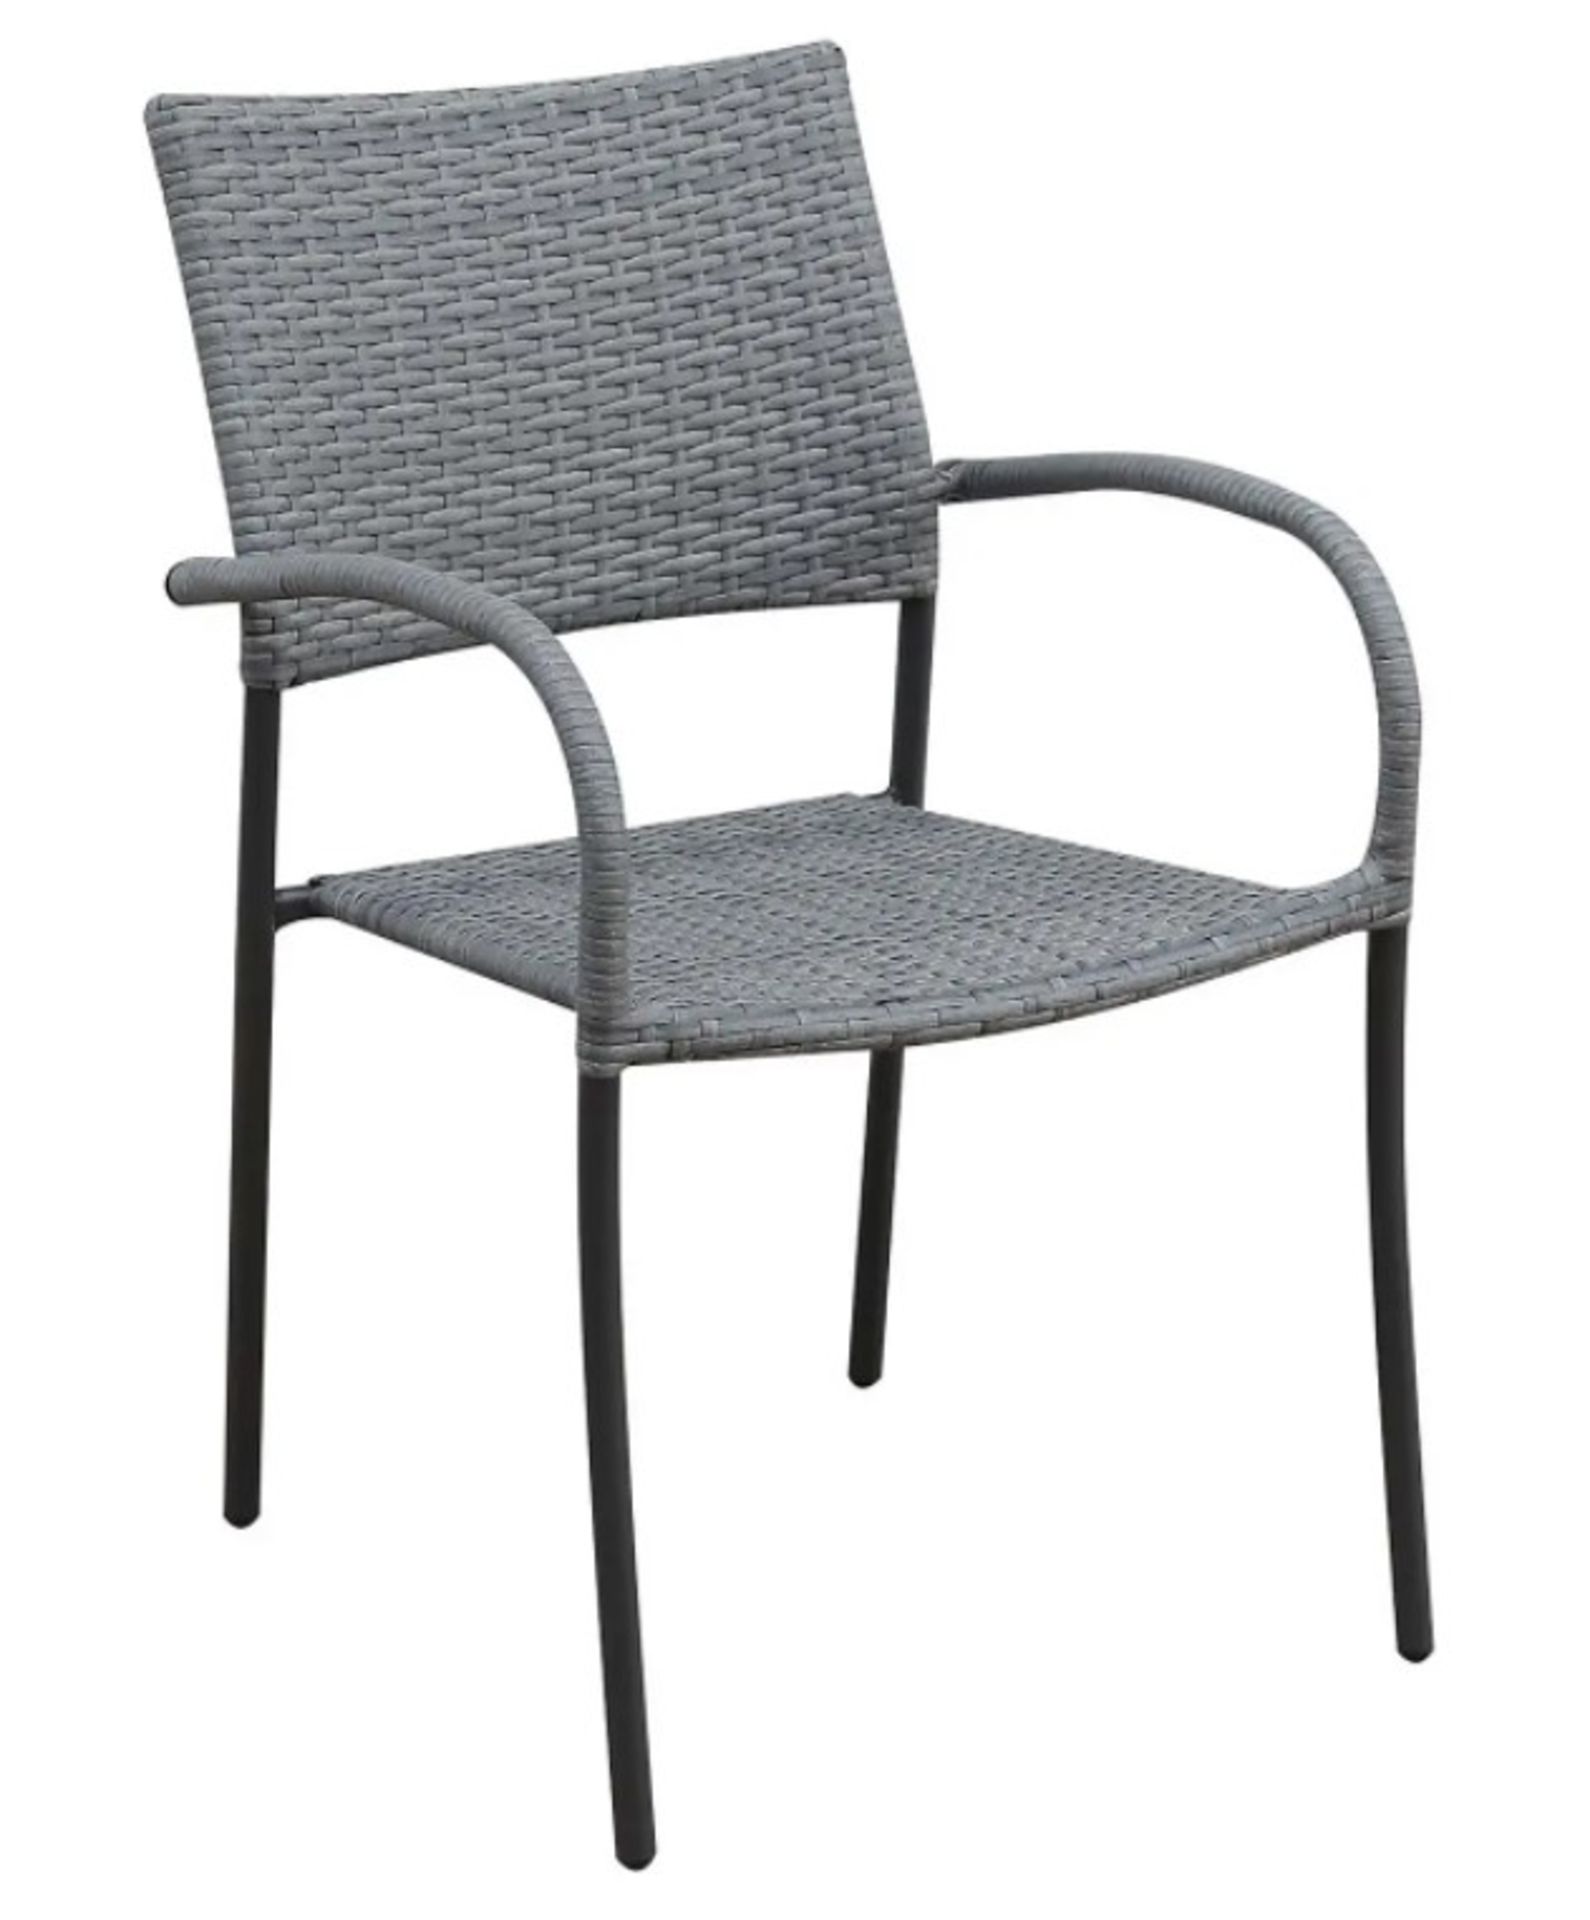 (60/5F) 6x Bambrick Stacking Chair Grey. (All Units Appears As New). - Image 3 of 4